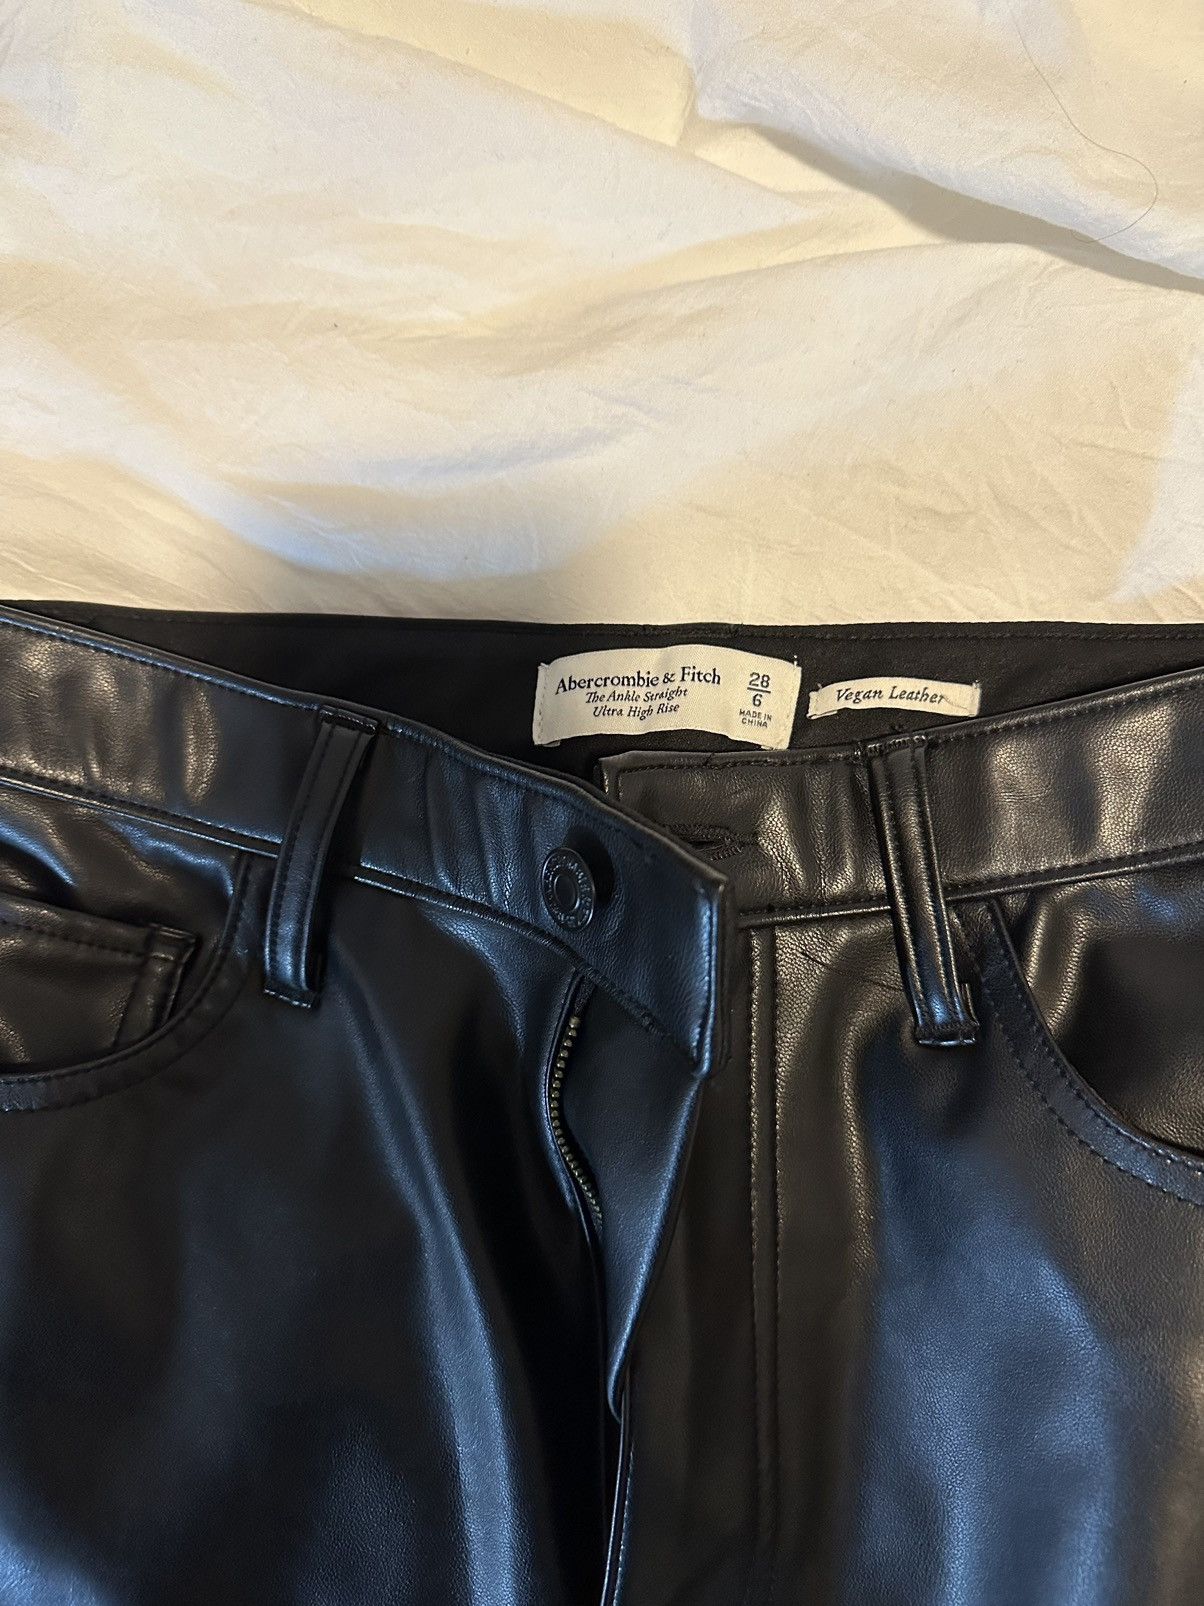 Abercrombie & Fitch Vegan Leather Ankle Straight Pant Size 28" / US 6 / IT 42 - 5 Preview